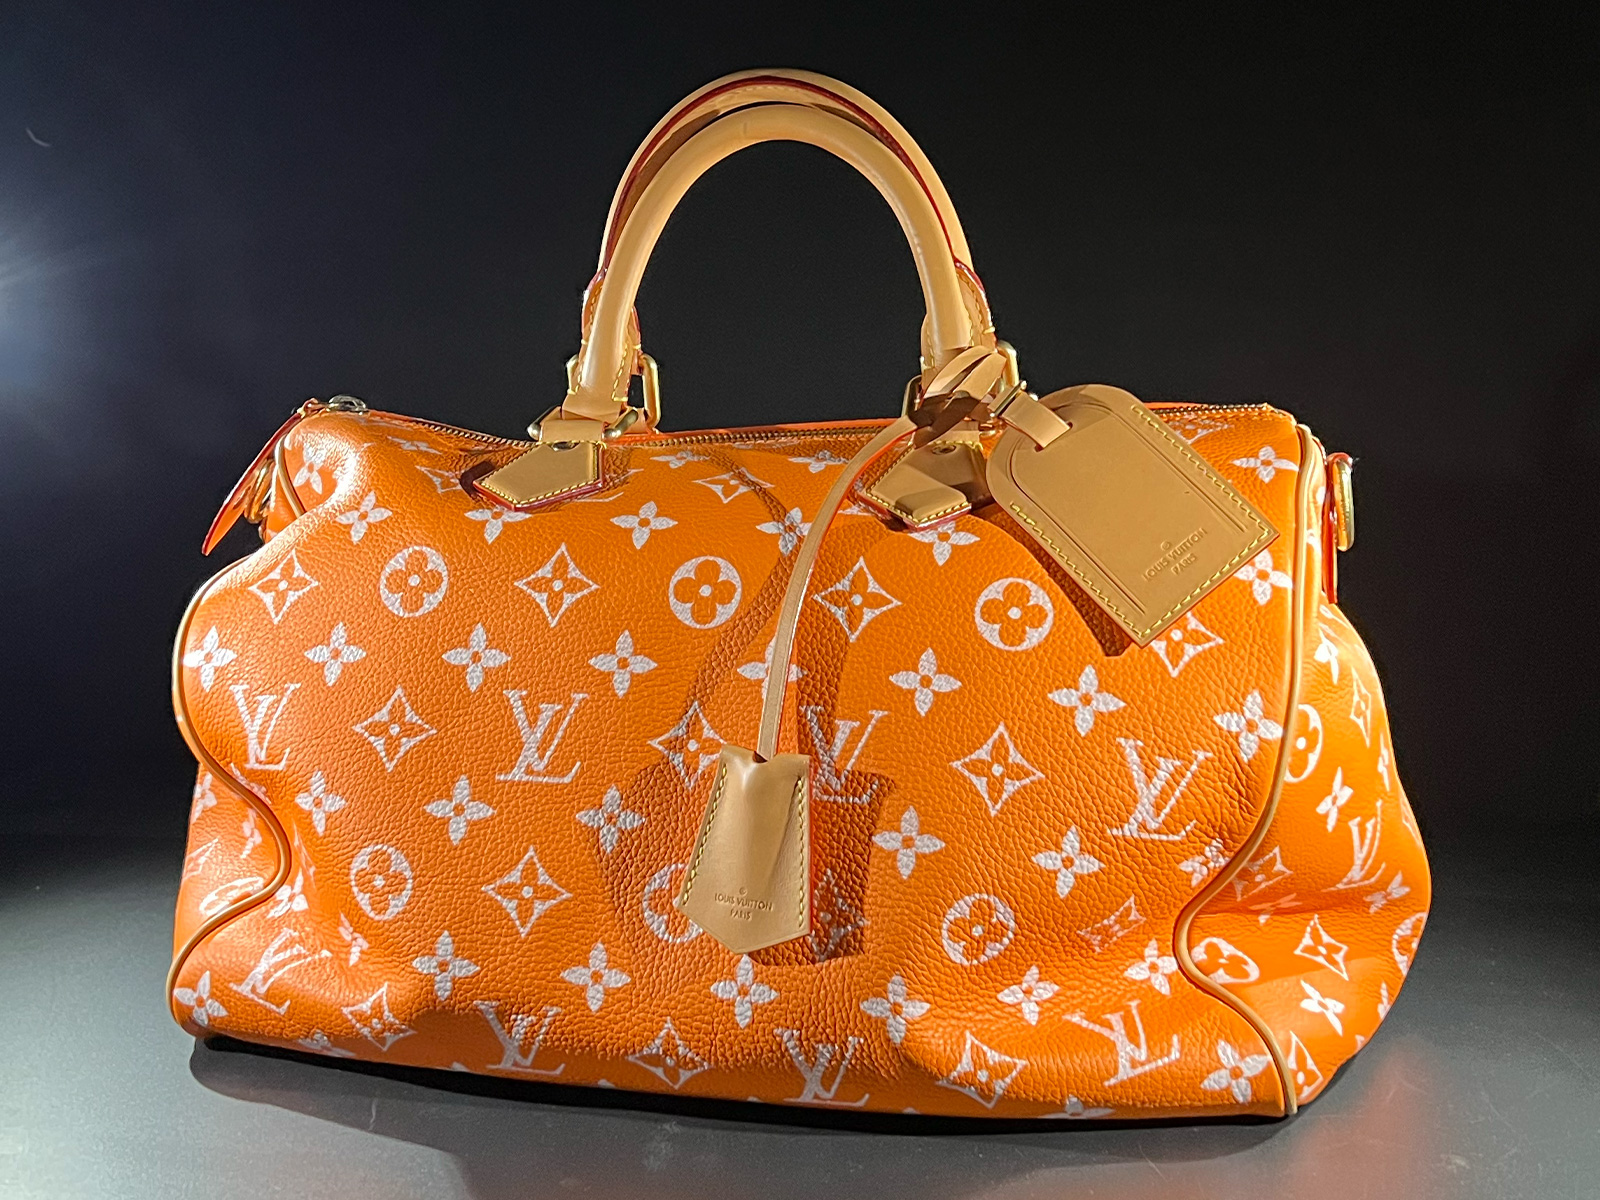 Louis Vuitton's luxurious Millionaire Speedy Bag is here for $1